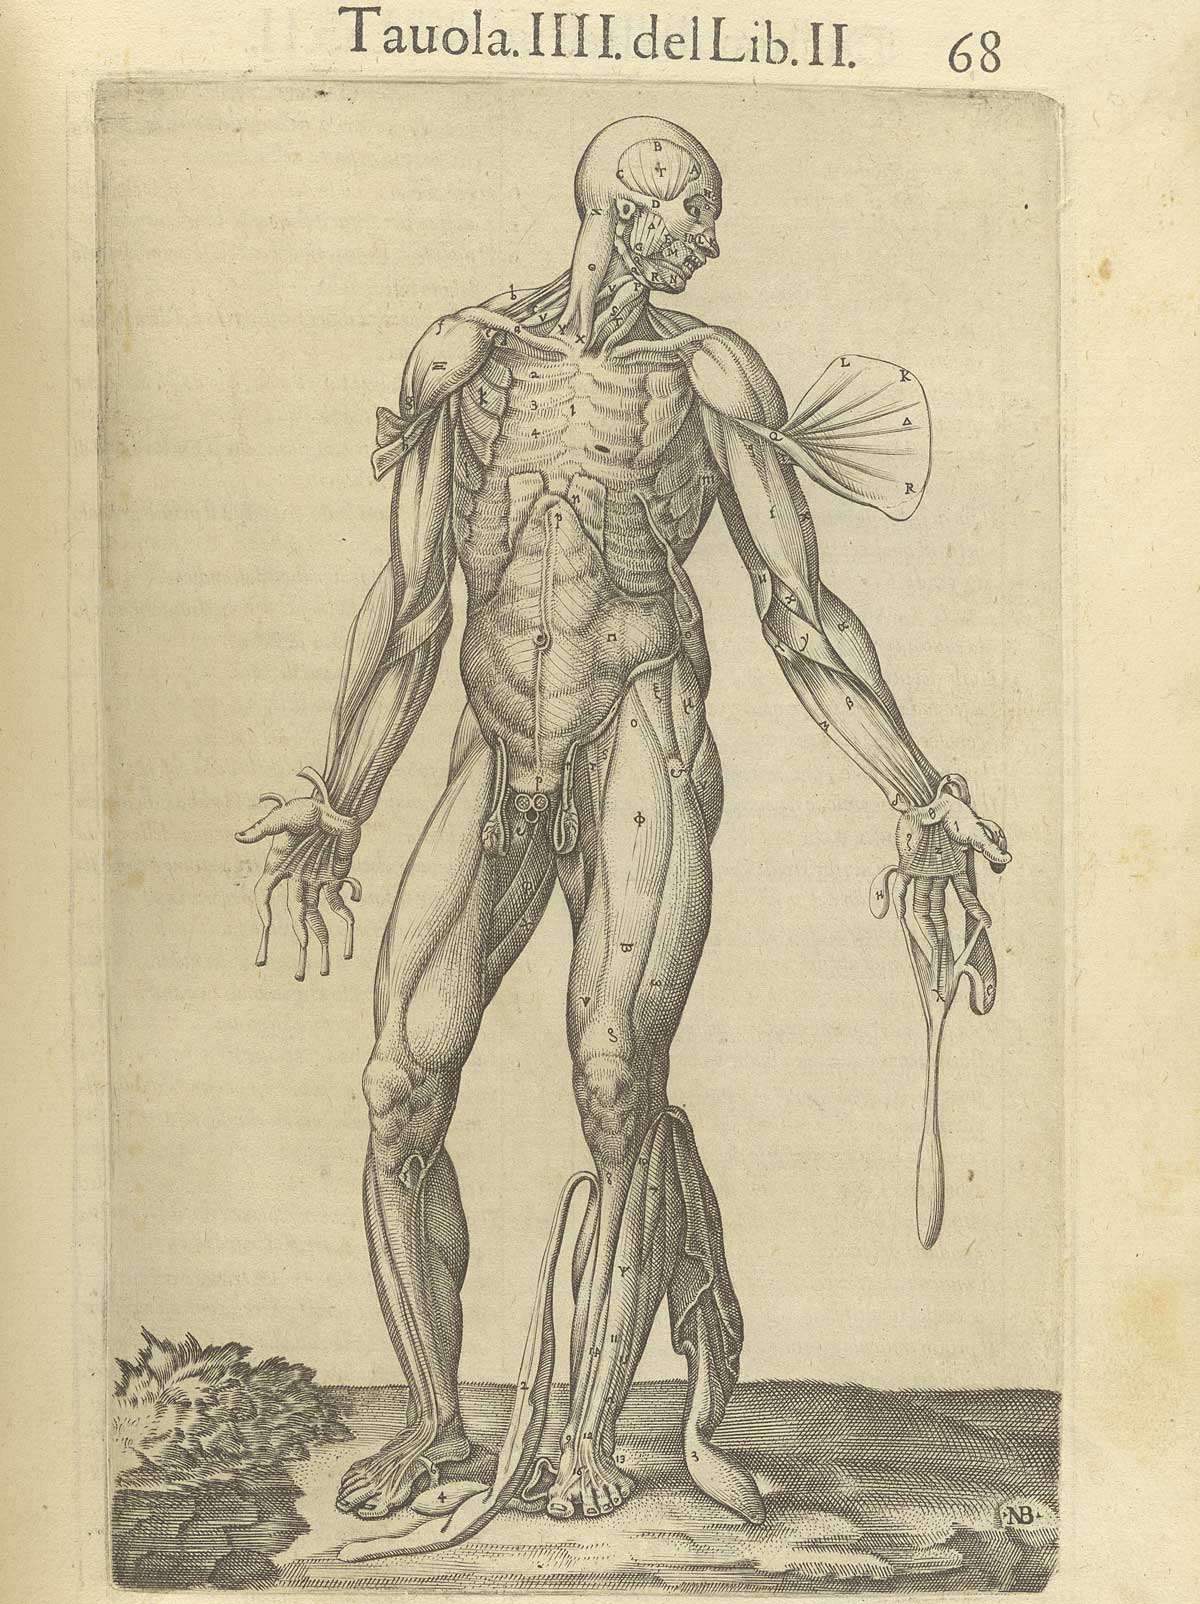 Page 68 of Juan Valverde de Amusco's Anatomia del corpo humano, featuring a flayed cadaver with flaps of muscle in the arms, hands and legs fanned away to reveal muscles underneath them.